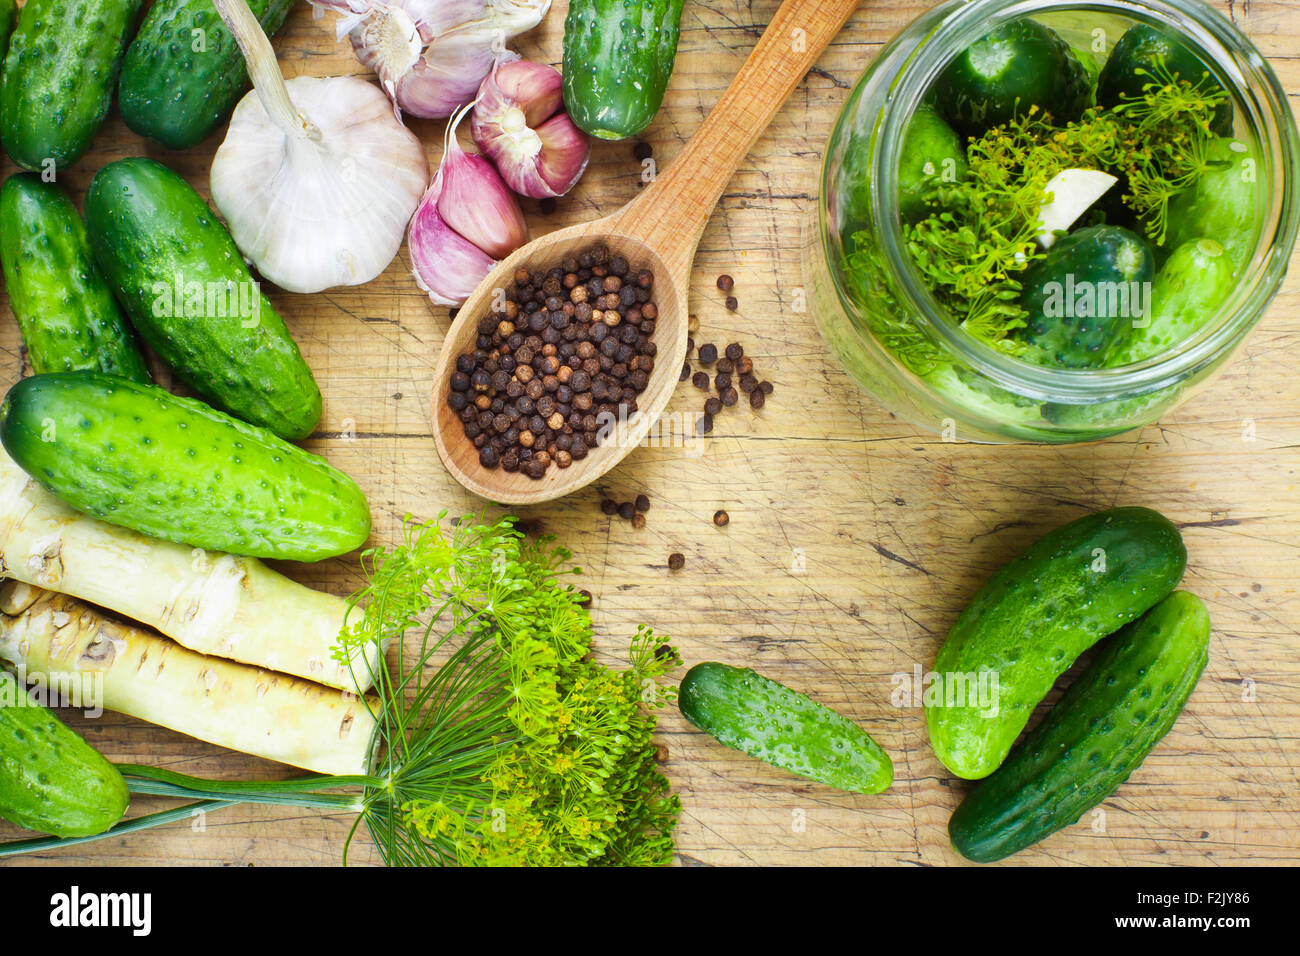 Preparations to make homemade pickles with garlic, dill and horseradish on woodboard Stock Photo